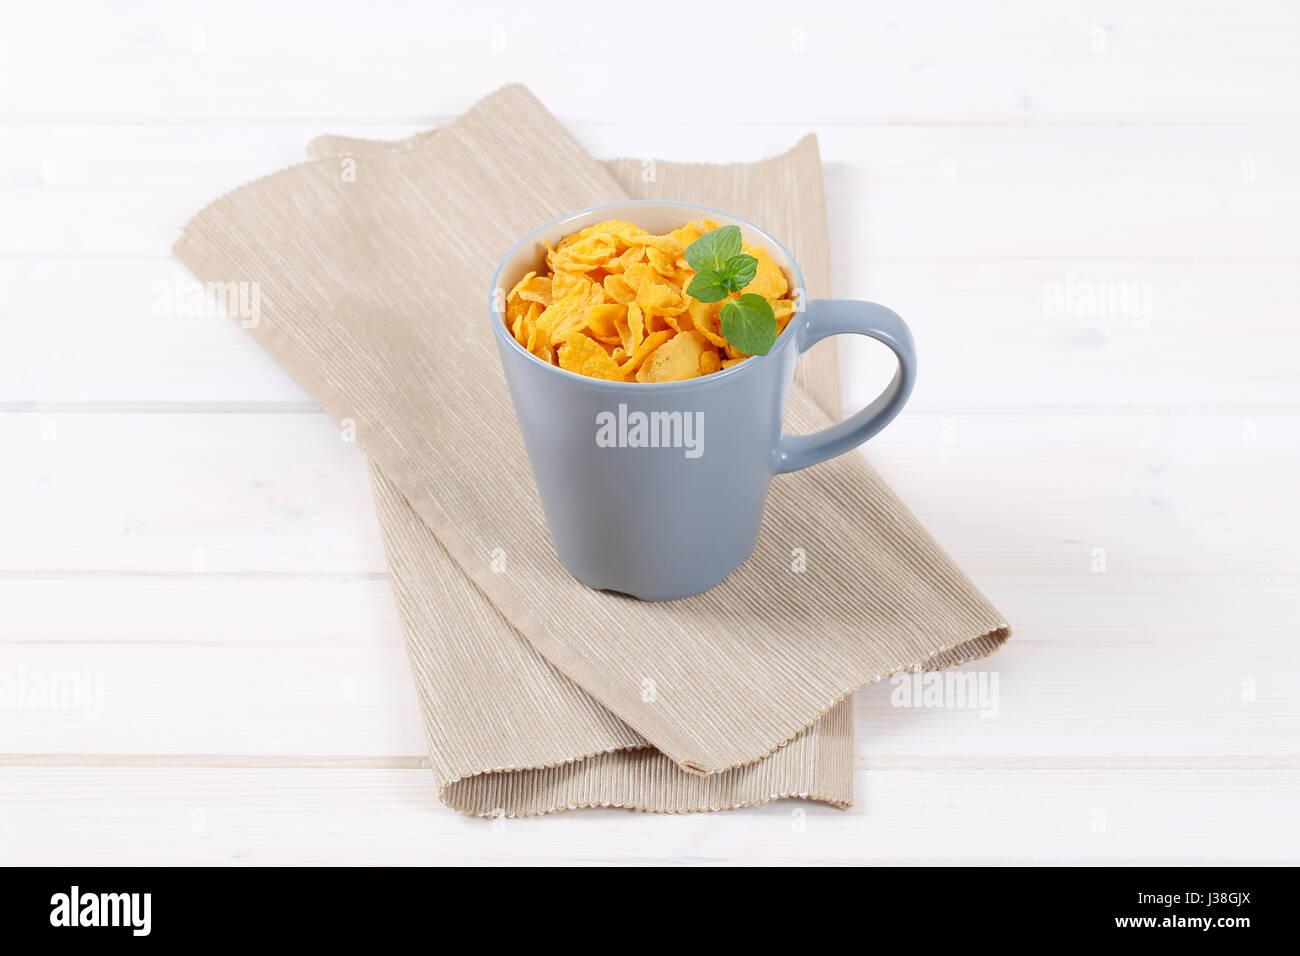 cup of corn flakes on beige place mat Stock Photo